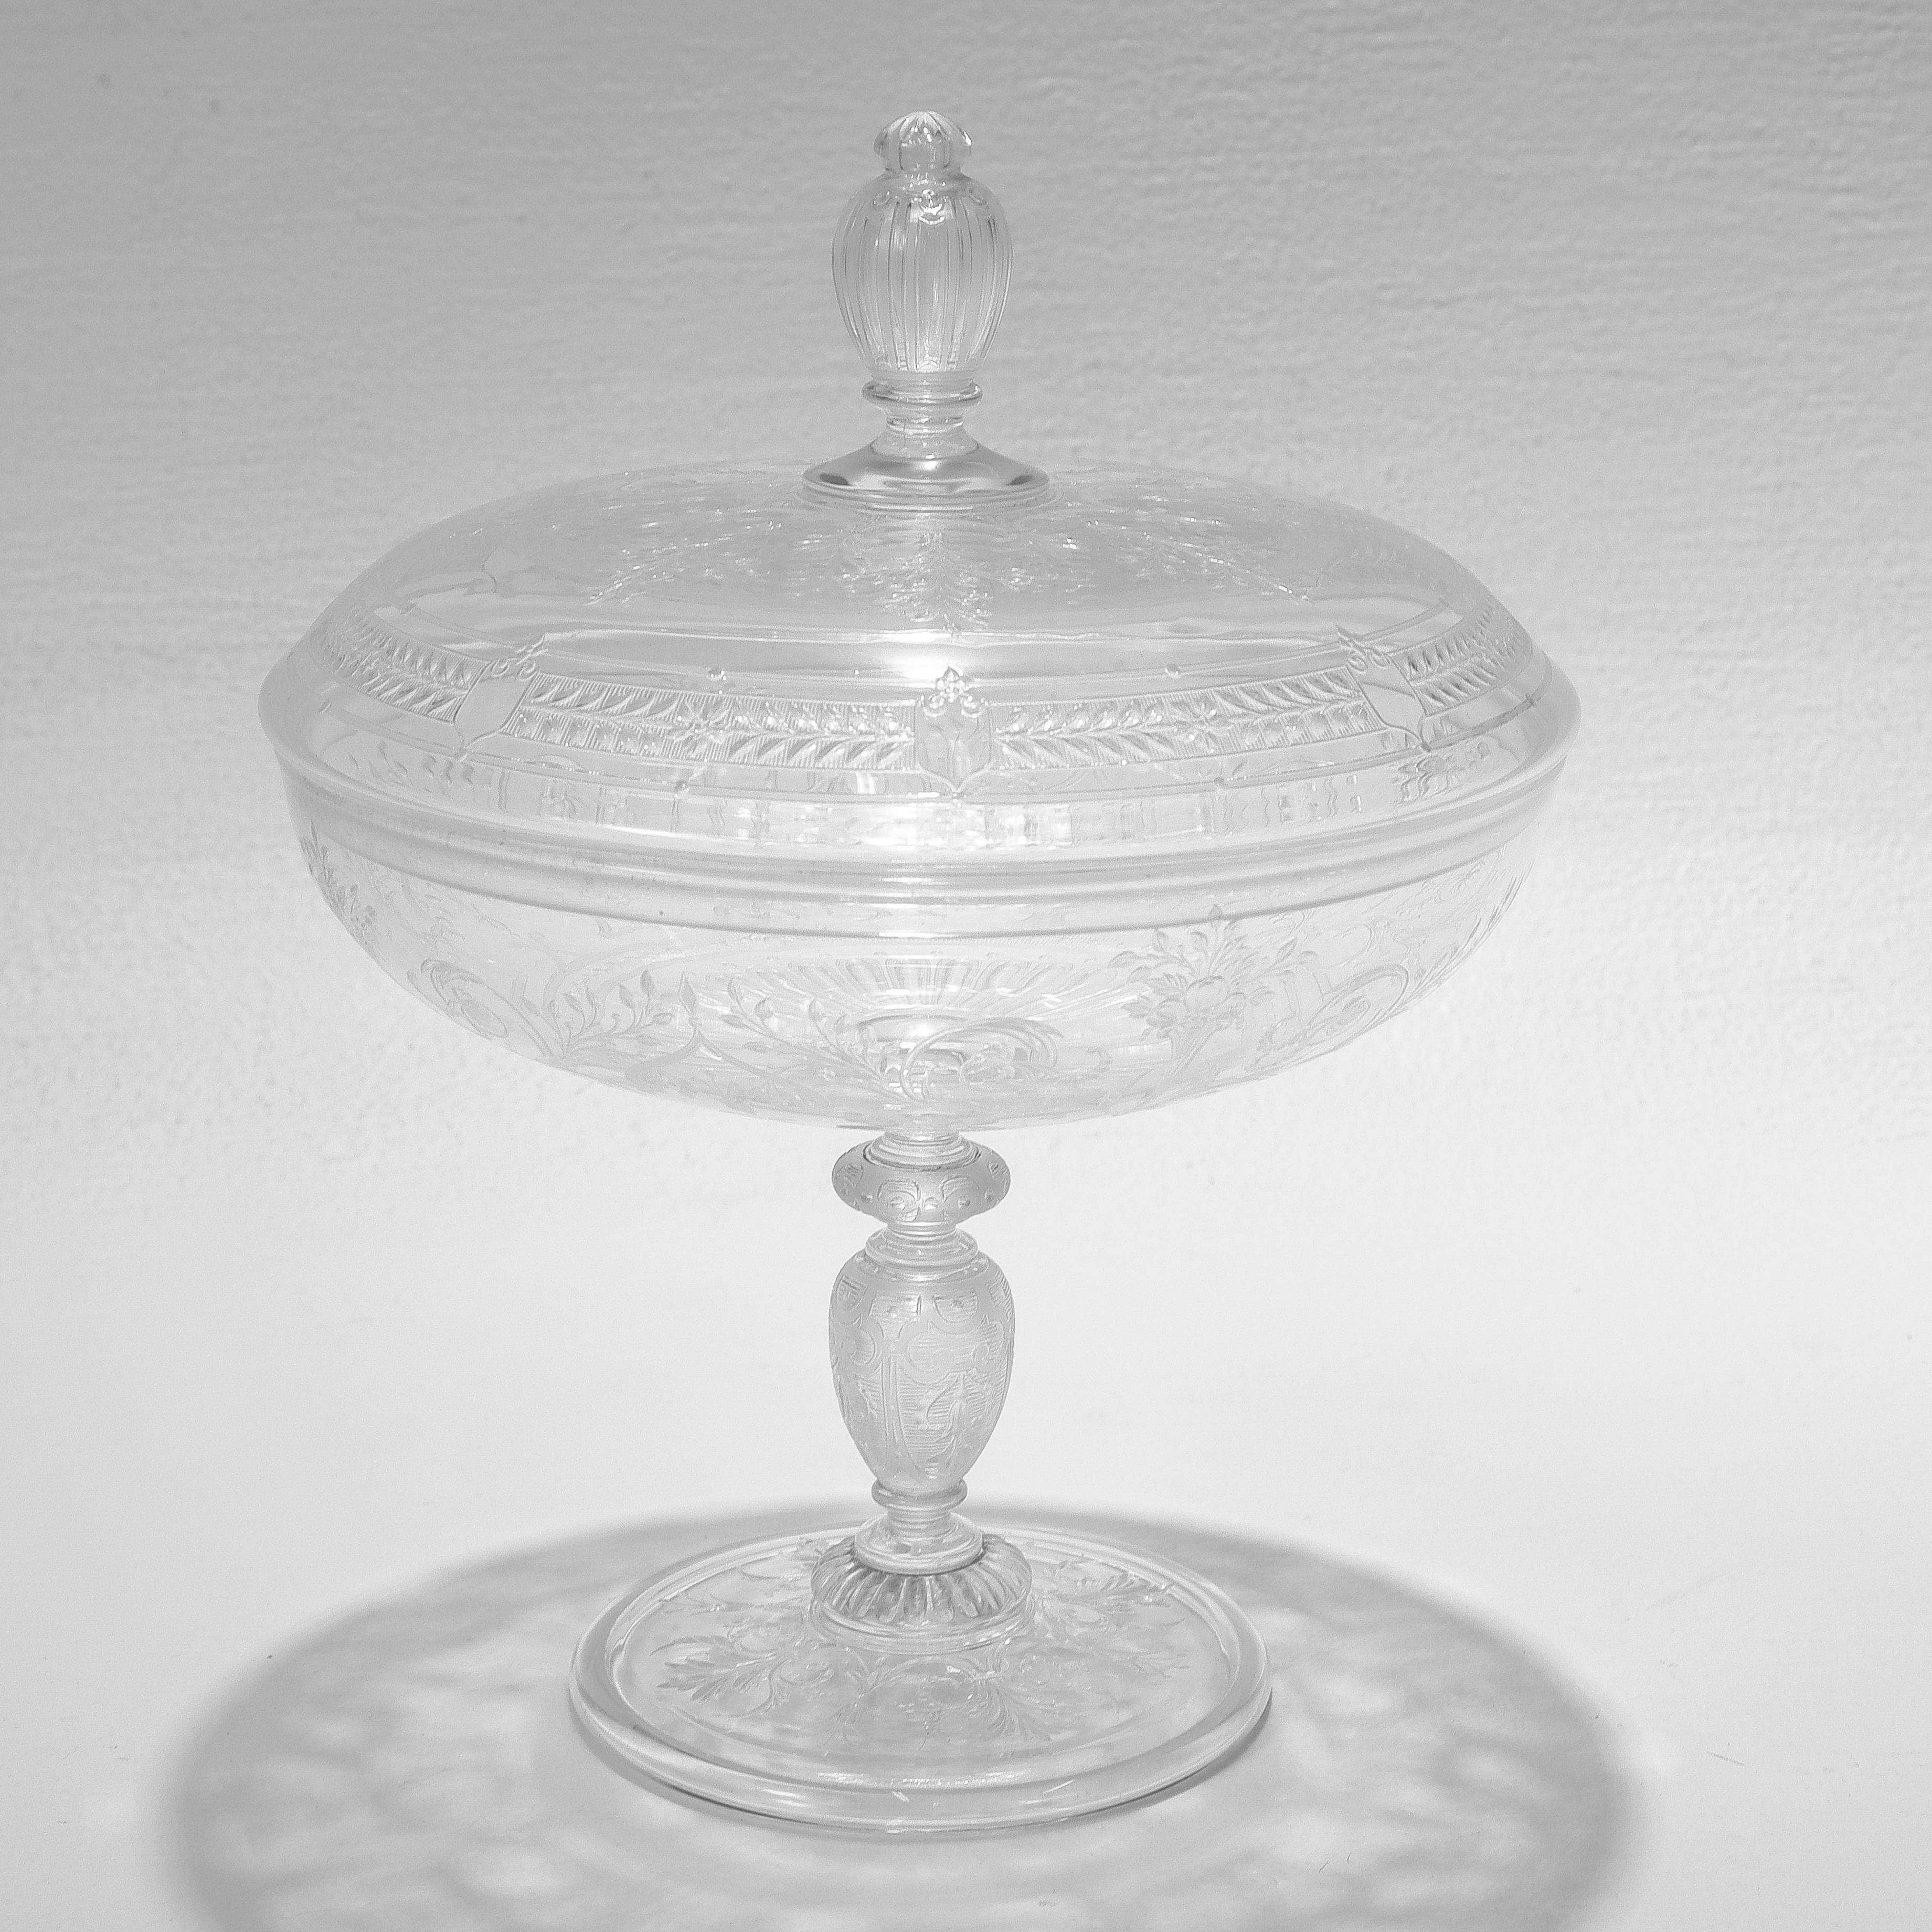 A fine antique etched and engraved glass tazza or compote.

Attributed to Stevens & Williams or Webb.

With engraved & etched leaves, fruits, and geometric designs.

The lid is topped with a decorative finial handle.

Simply a wonderful